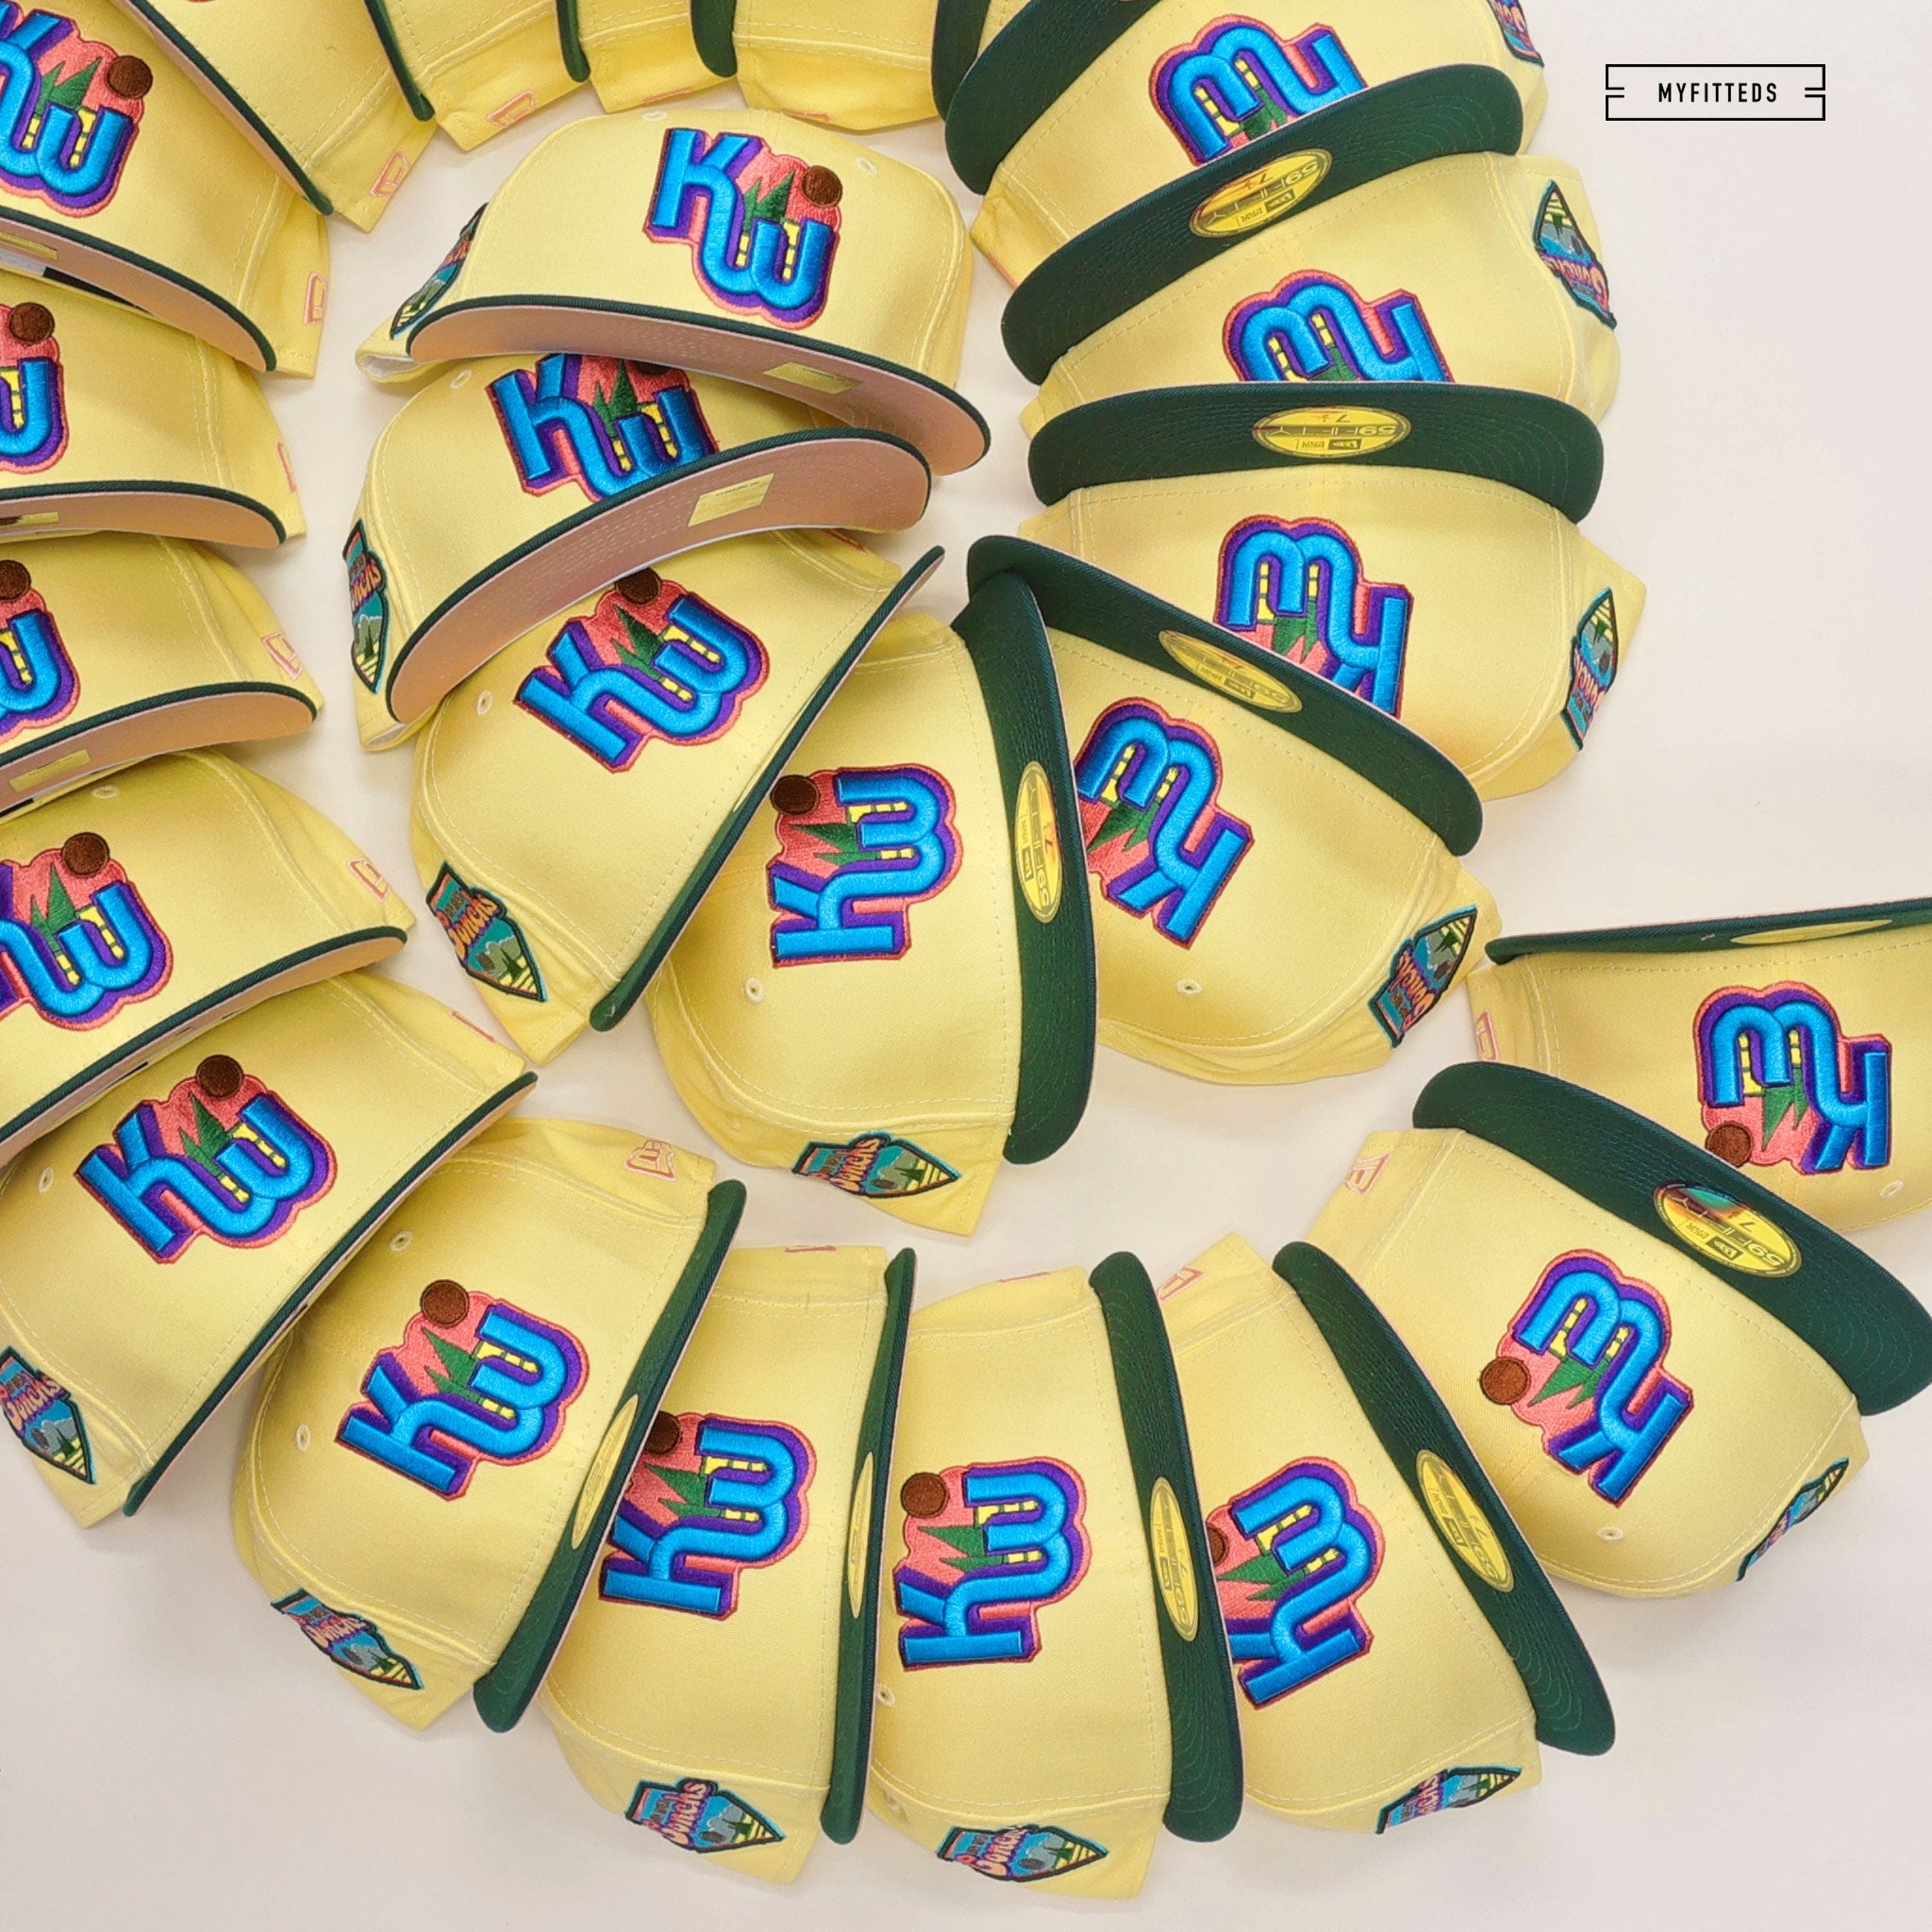 Key West Conchs Air Max 1/97 Sean Wotherspoon Inspired Fitted Hat